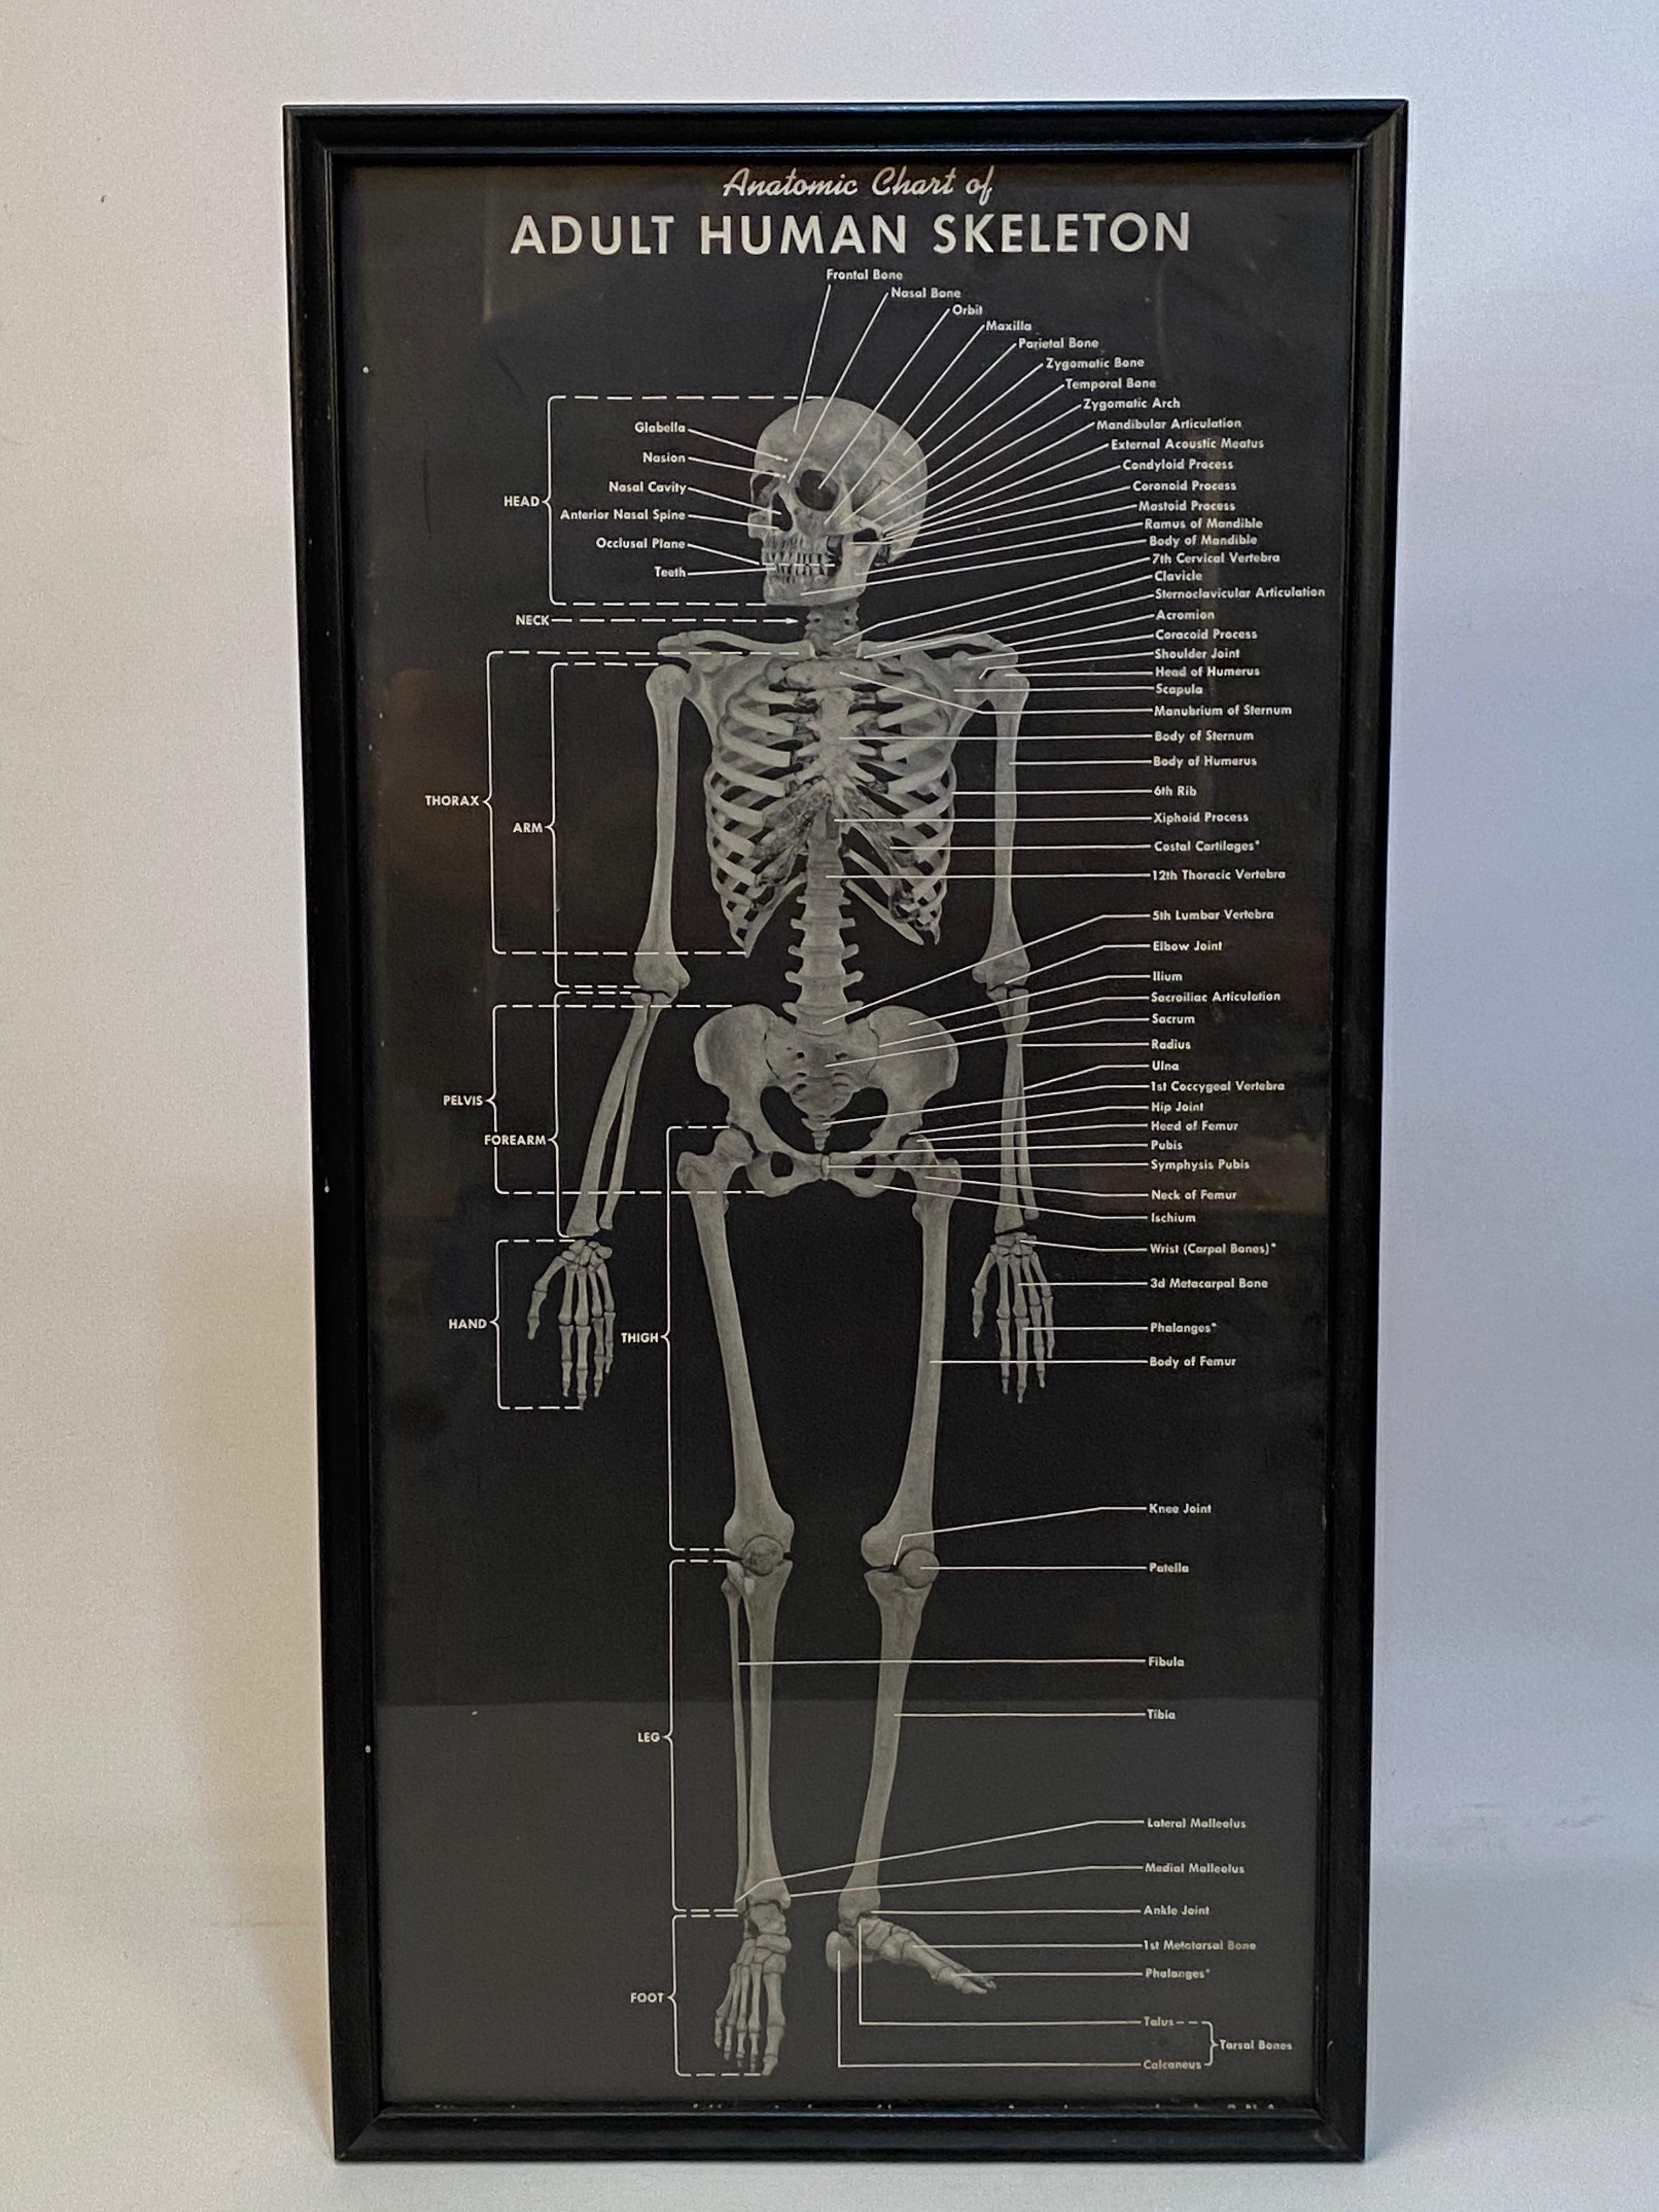 1940s Anatomic Chart of Adult Human Skeletal System 1